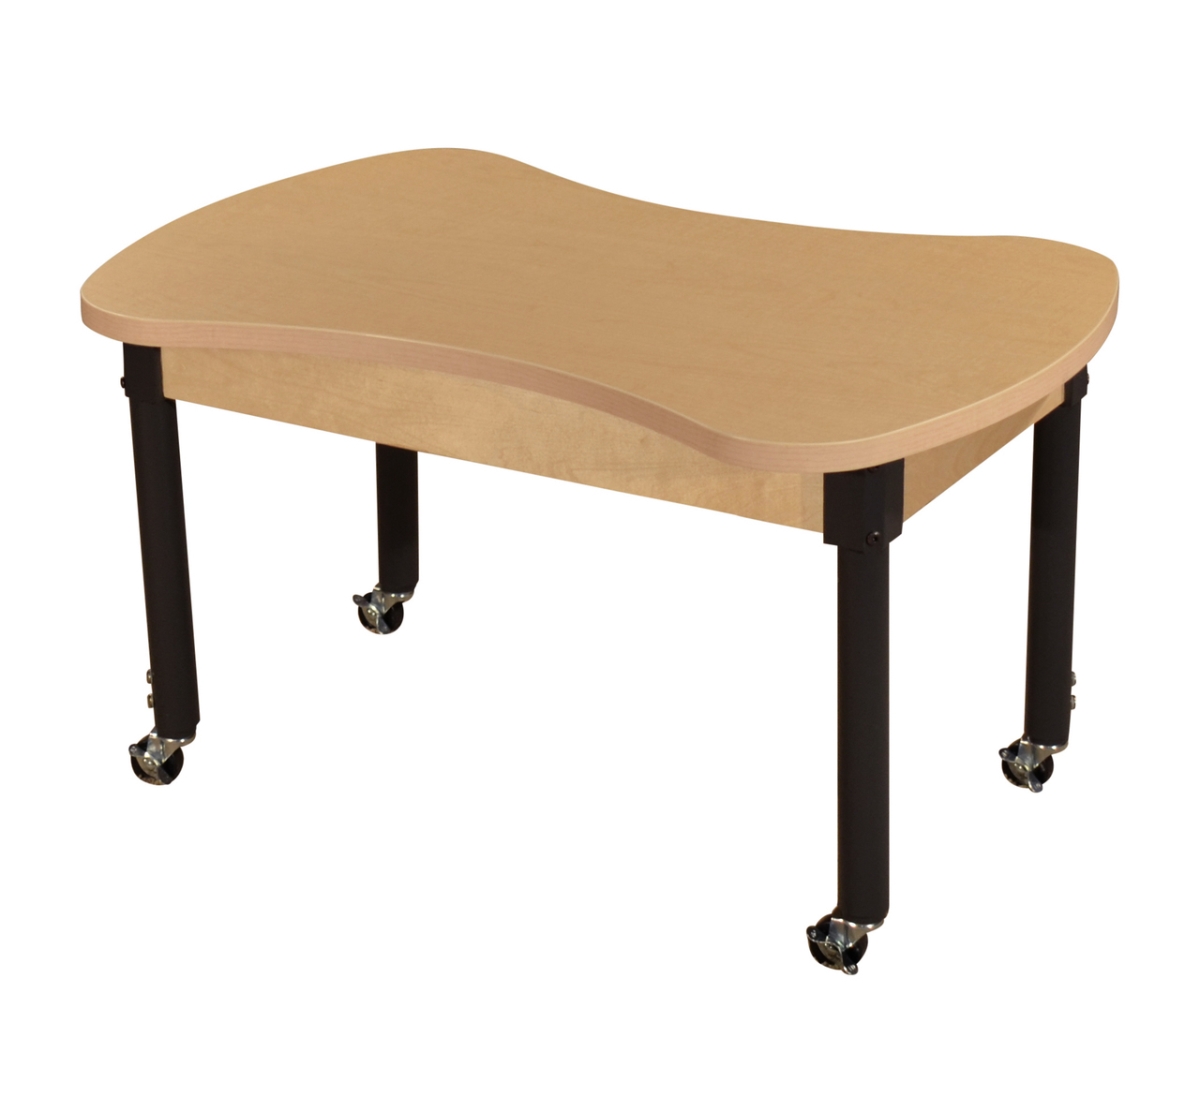 Picture of Wood Designs HPL2436CA1217C6 24 x 36 in. Mobile Synergy Junction, High Pressure Laminate Table with Adjustable Legs 14-19 in.